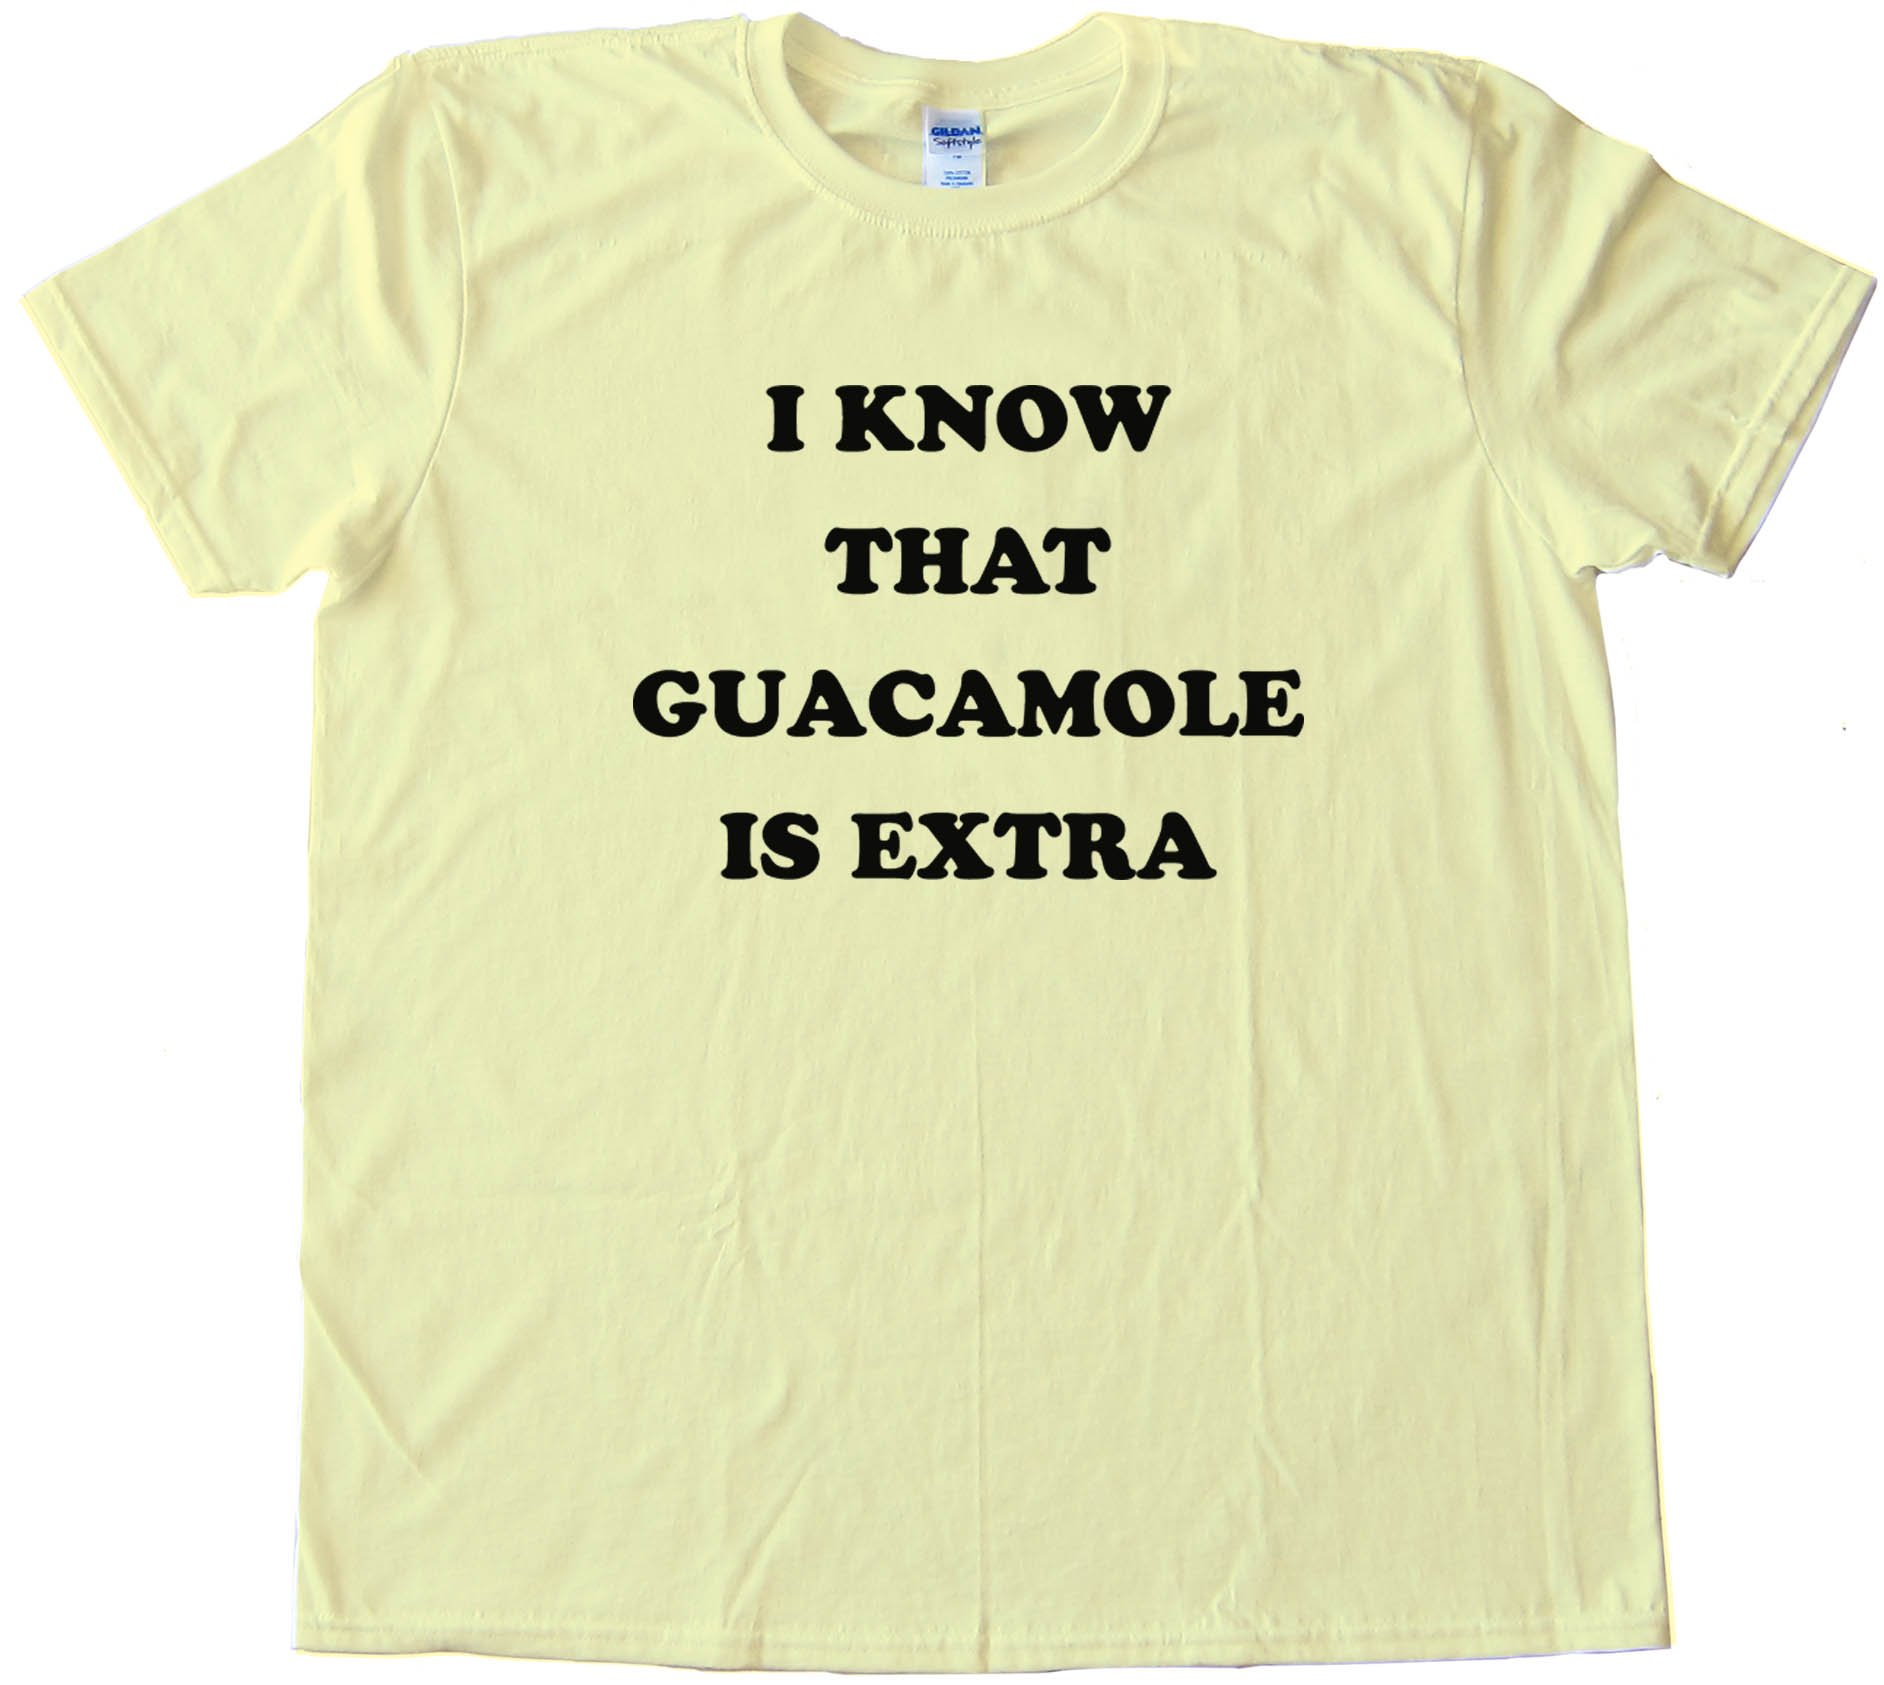 I Know That Guacamole Is Extra - Tee Shirt